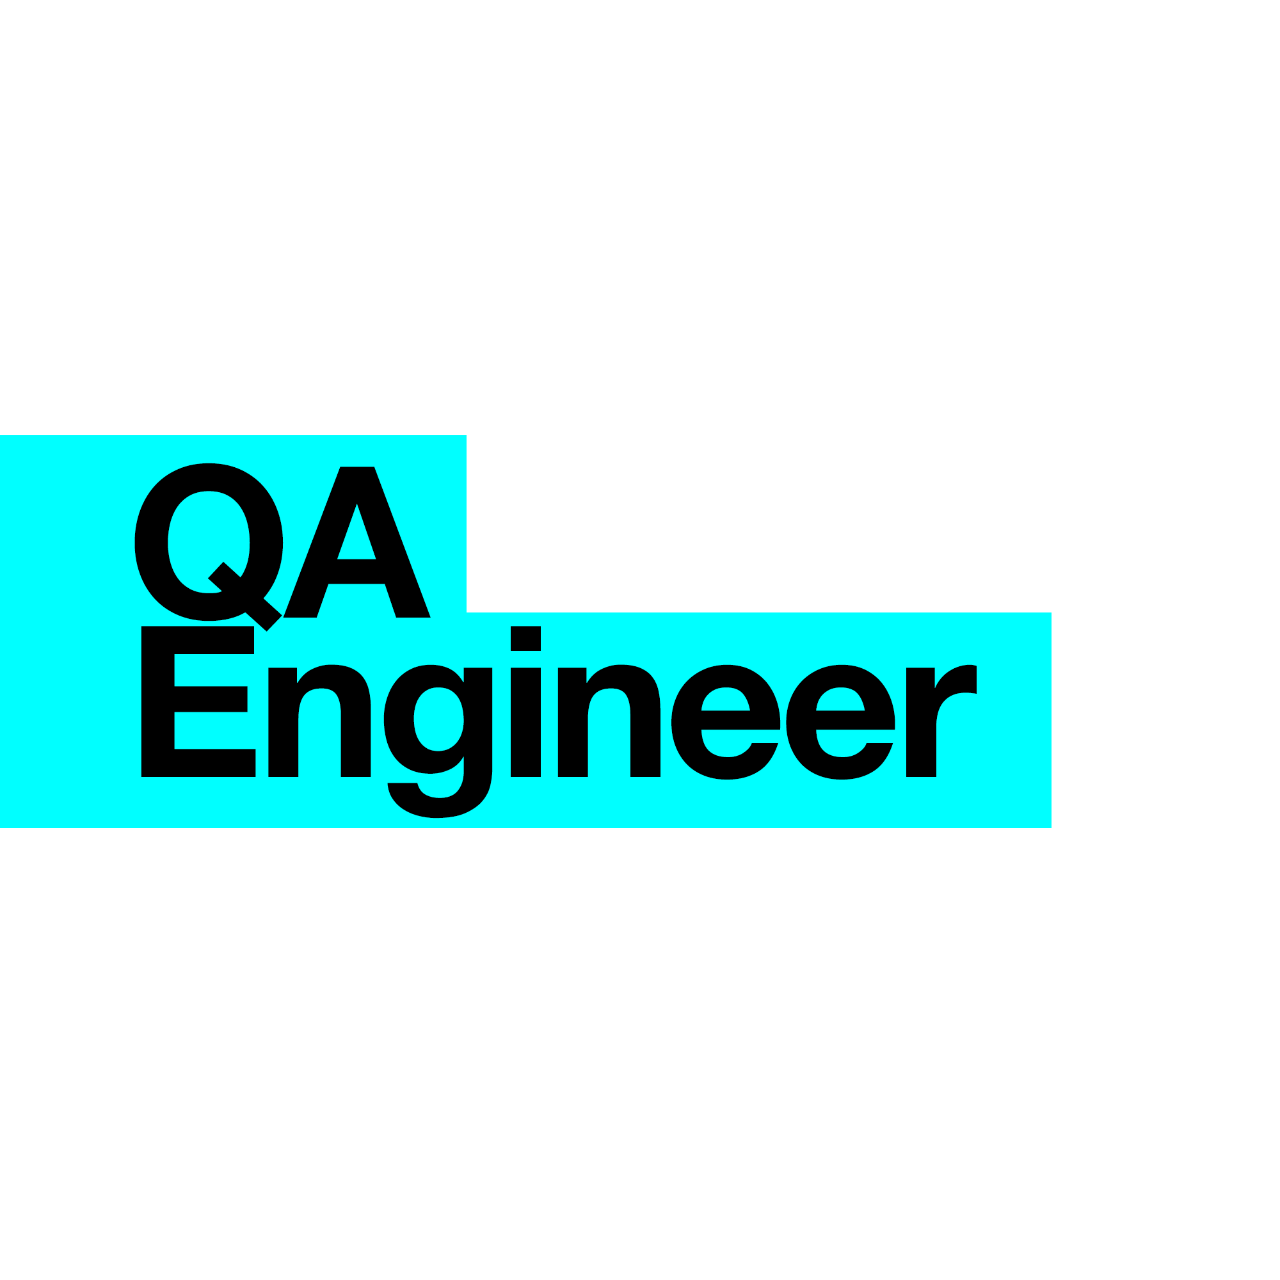 Quality Assurance Engineer – Full-Time Job in Bucharest